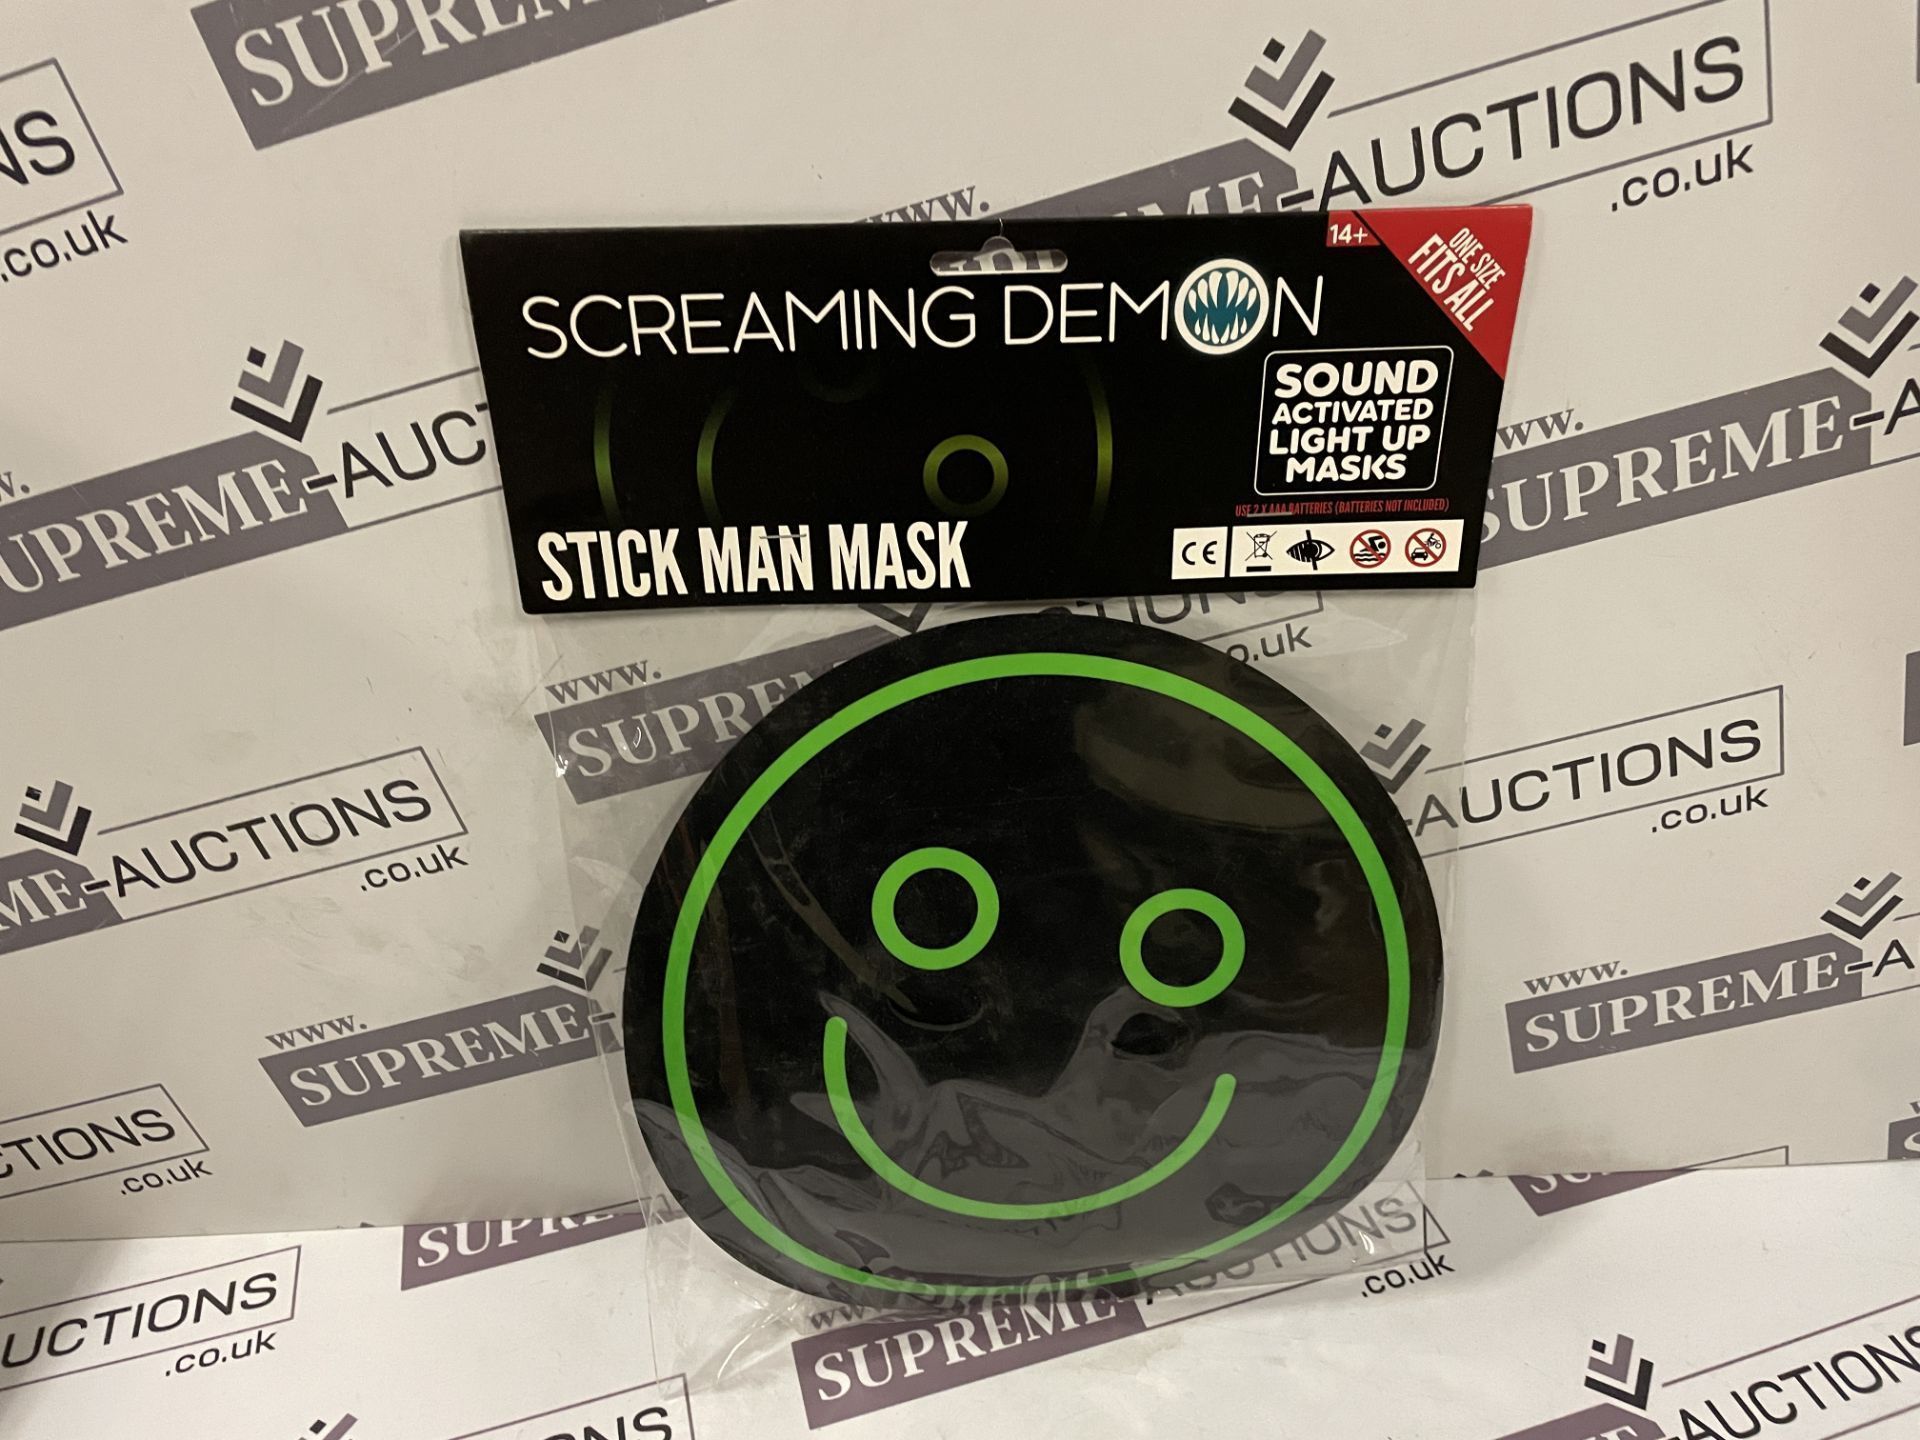 30 X BRAND NEW SCREAMING DEMON SOUND ACTIVATED LIGHT UP MASKS (DESIGNS MAY VARY) R10-9/11-11